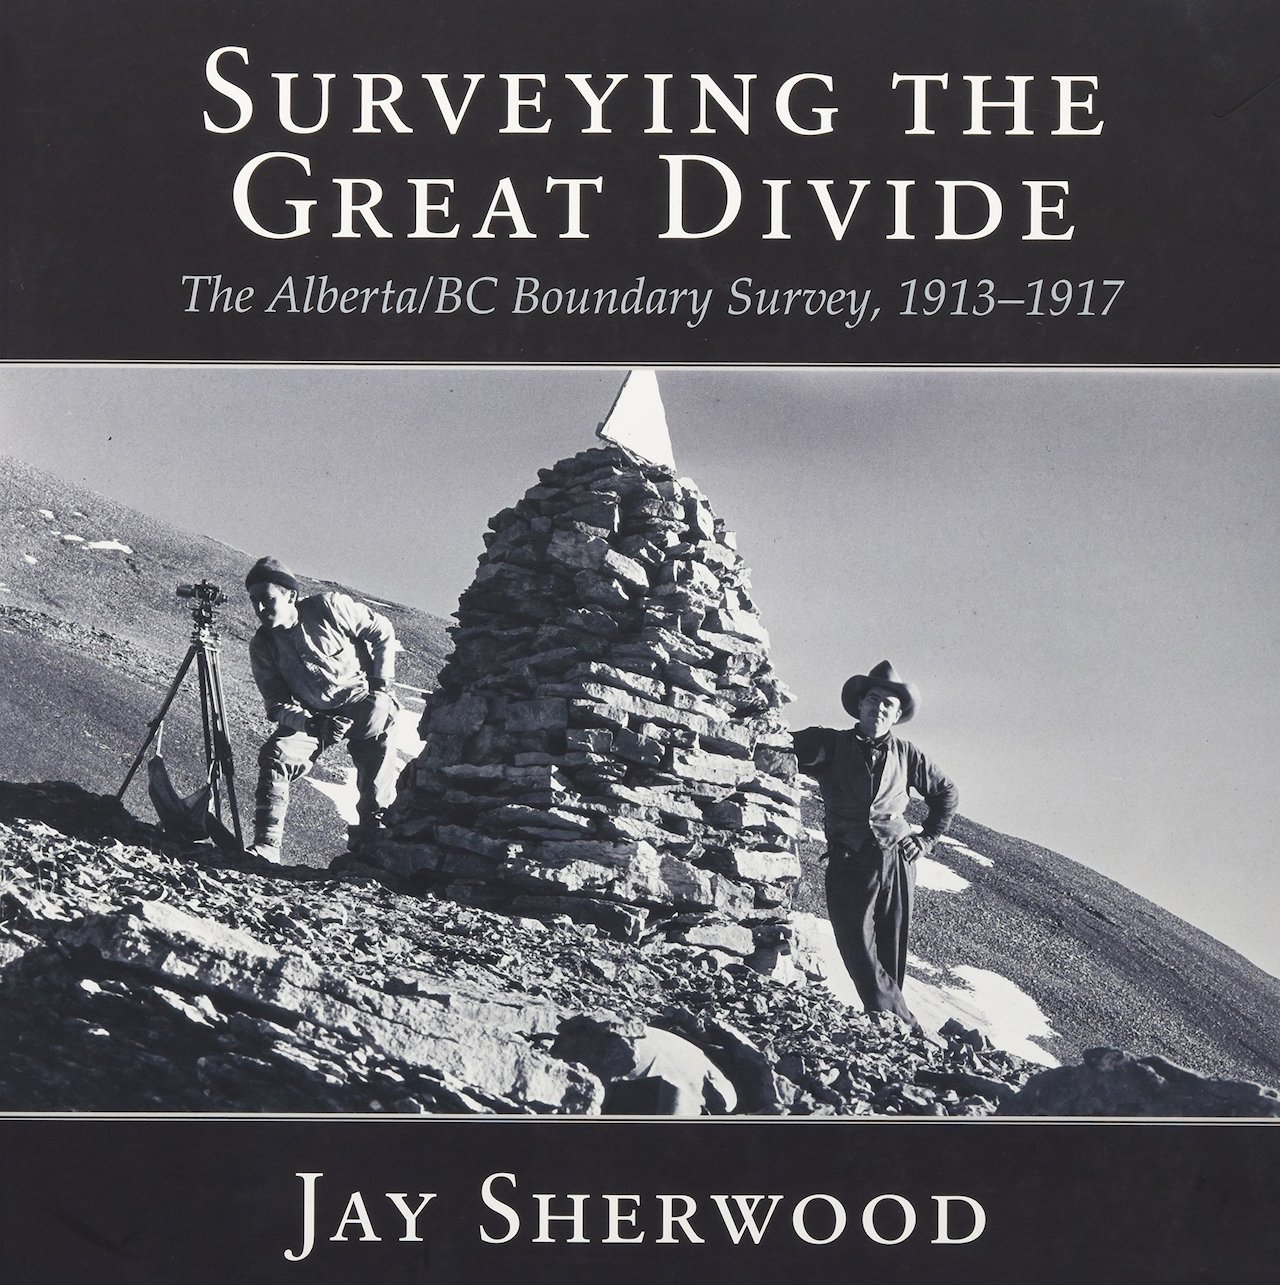 Book Review: Surveying the Great Divide